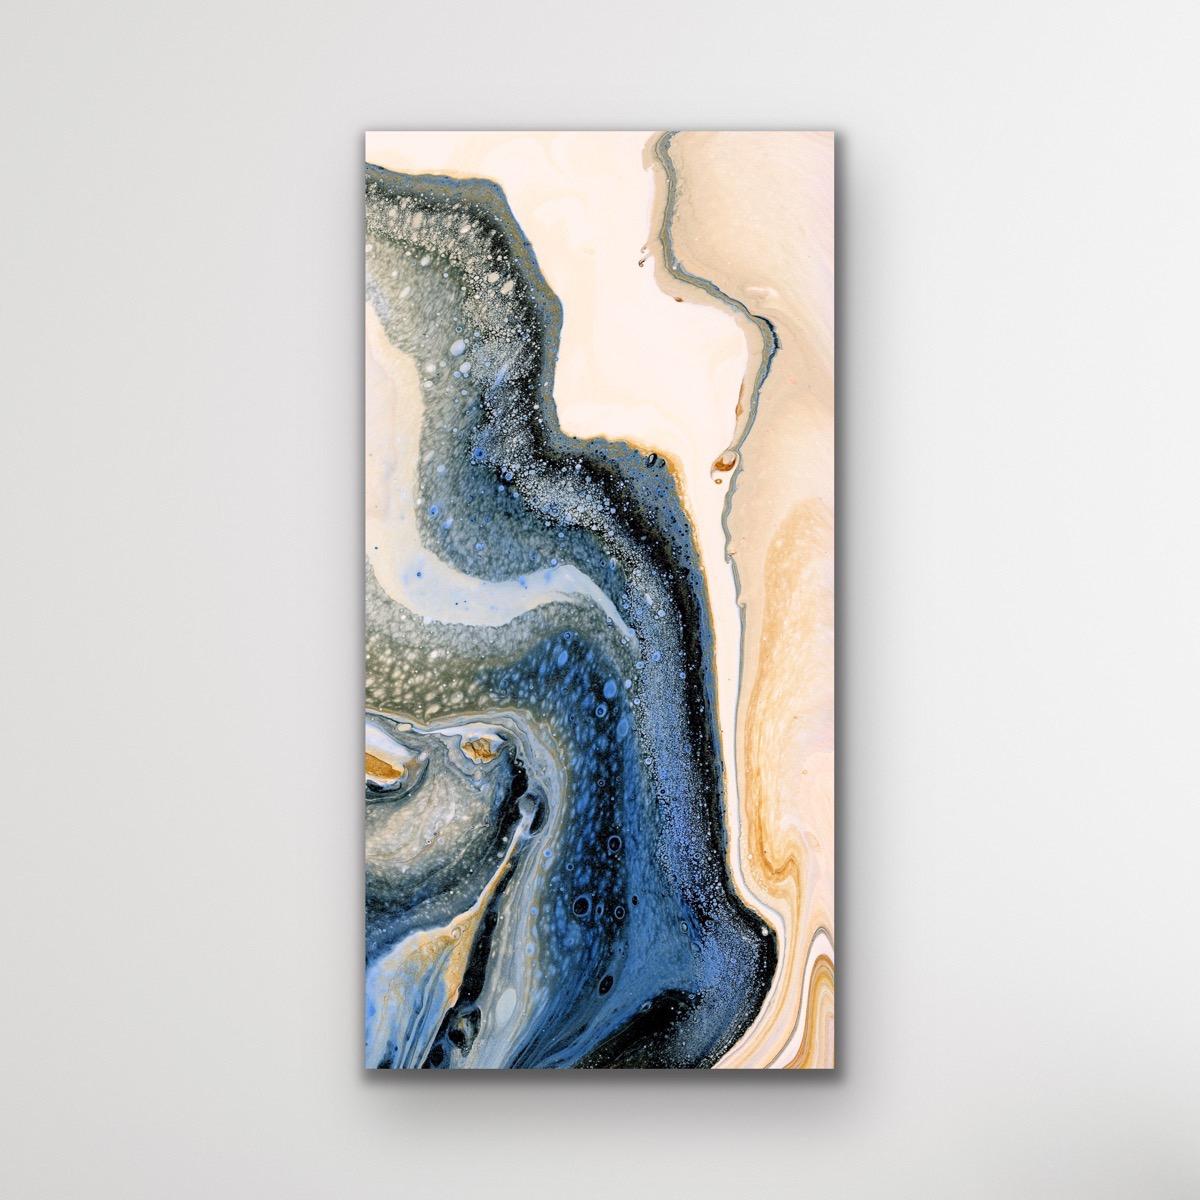 This modern abstract painting is printed on a lightweight metal composite and is suitable for indoor or outdoor decor. This open edition print of Celeste Reiter's original painting is signed by the artist. 

-Title: Crevasse
-Artist: Celeste